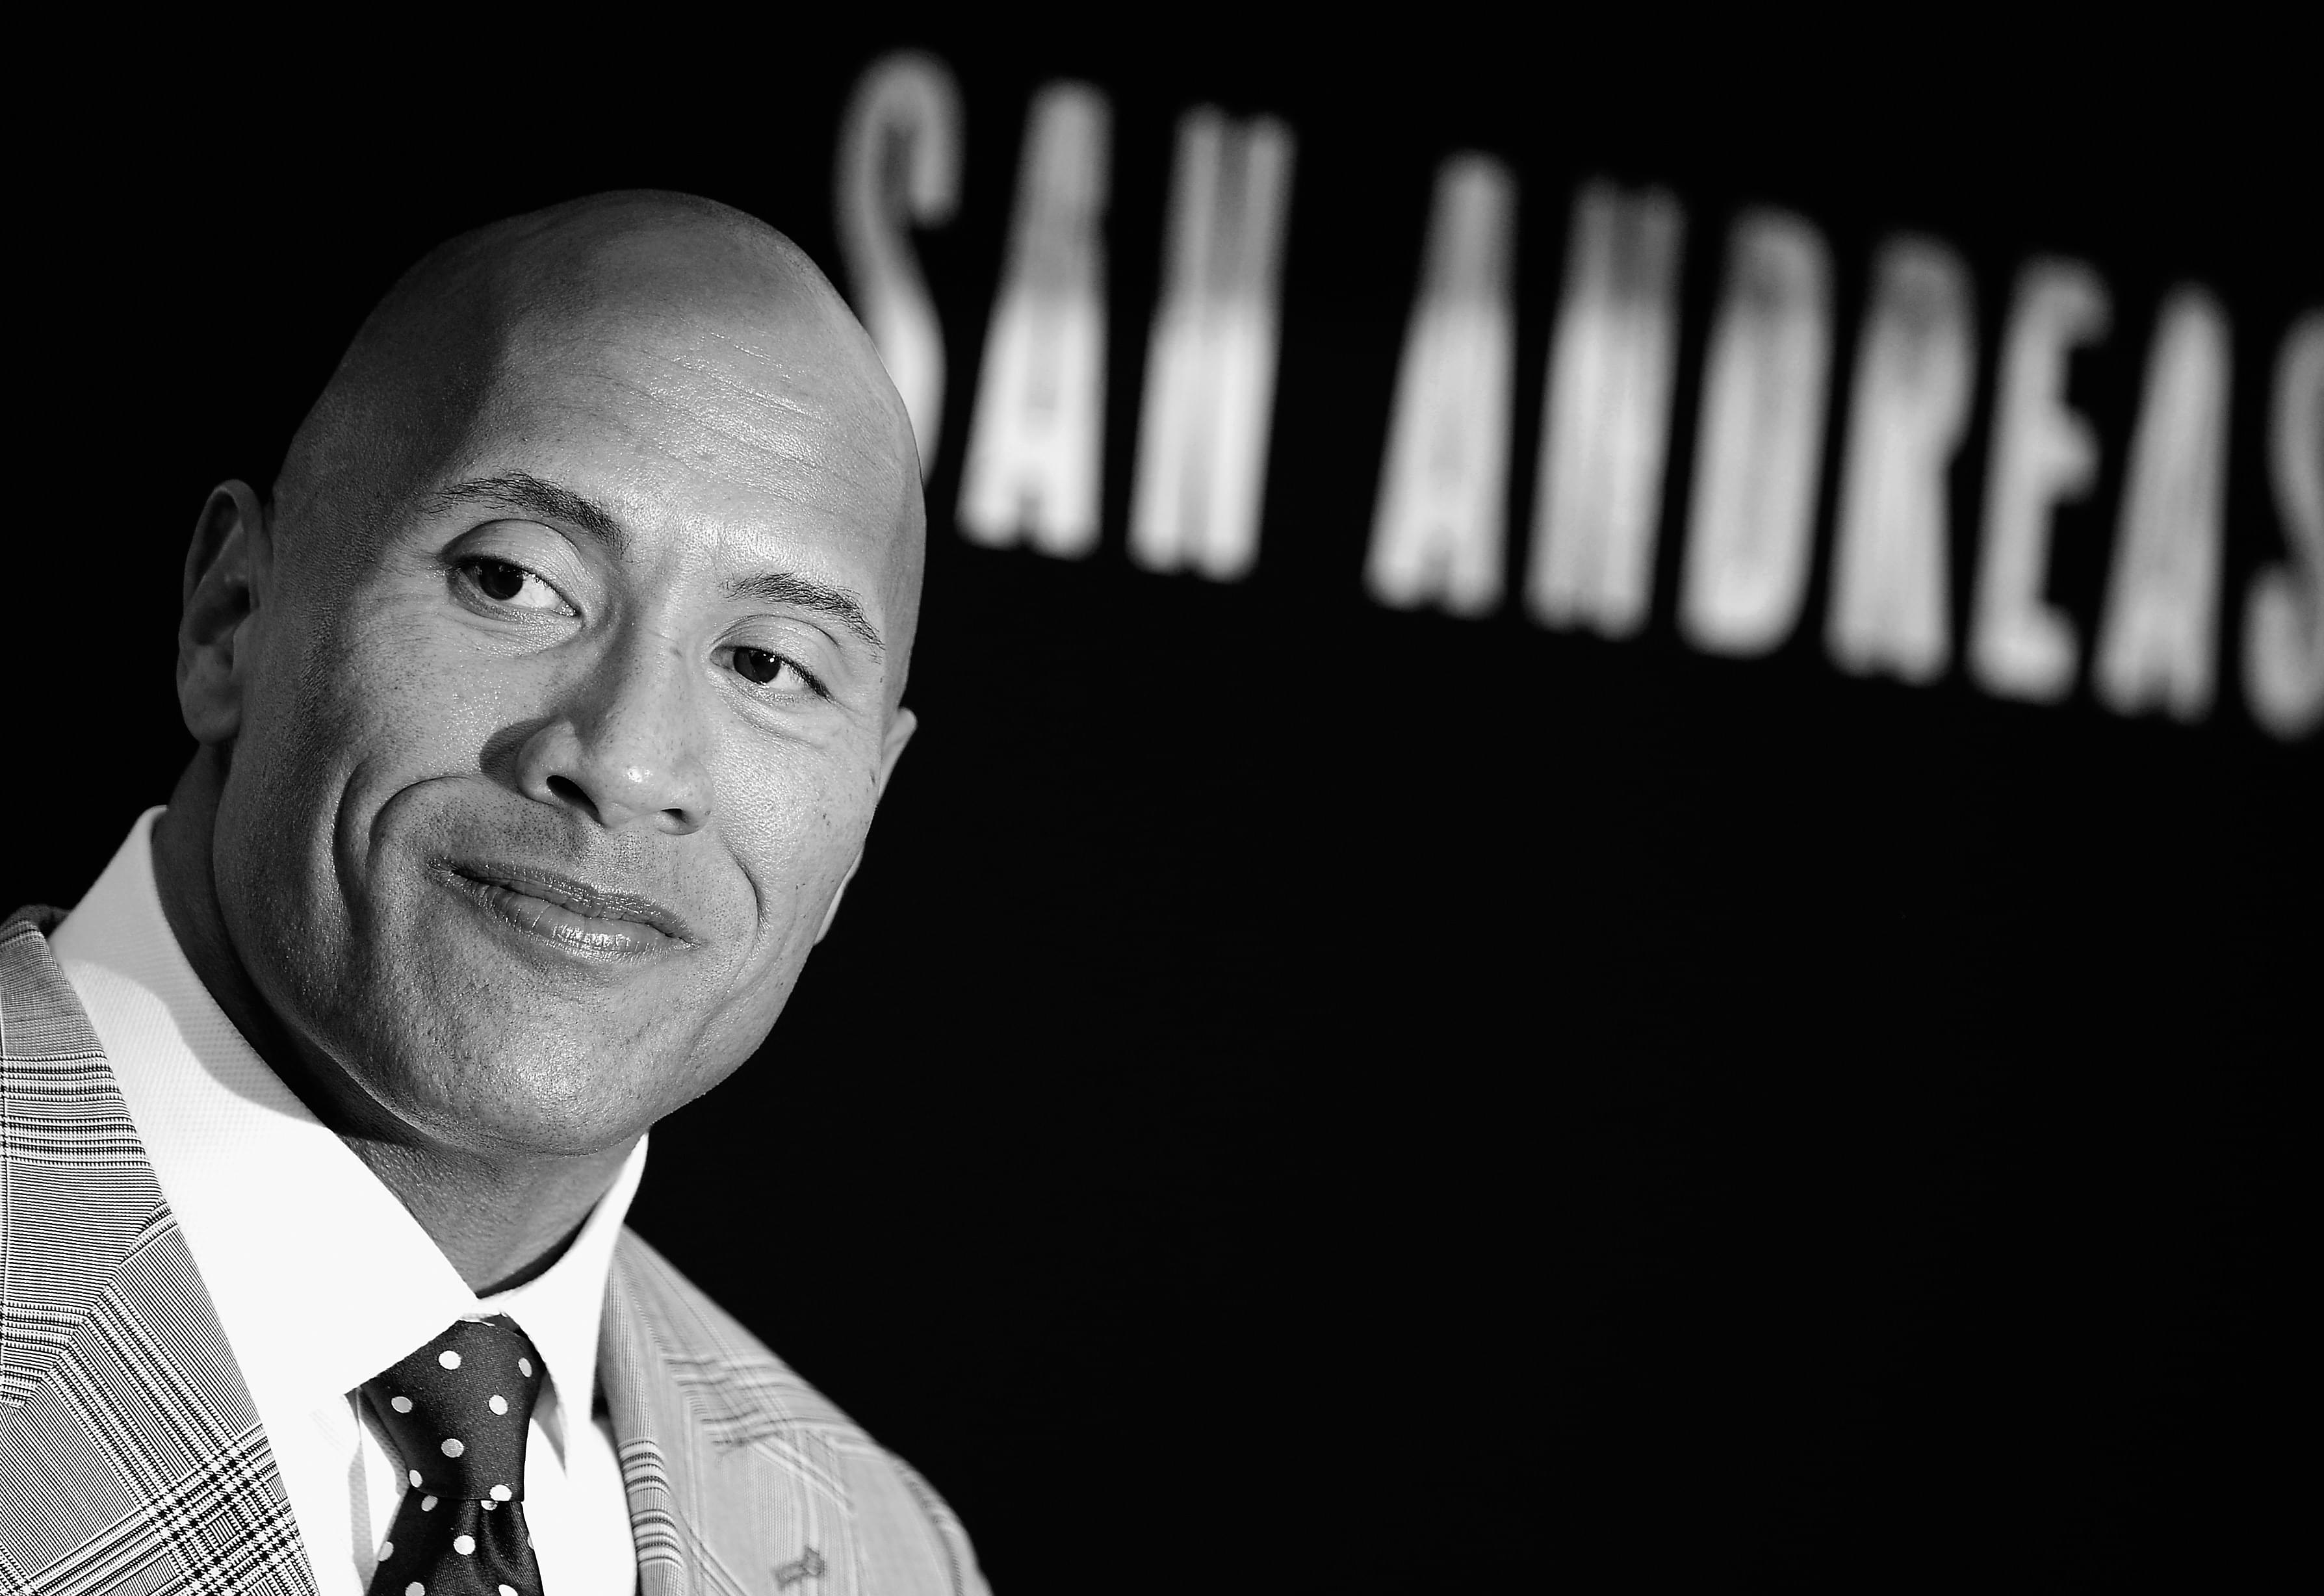 Dwayne “The Rock” Johnson Is Getting A Star on Hollywood’s Walk Of Fame